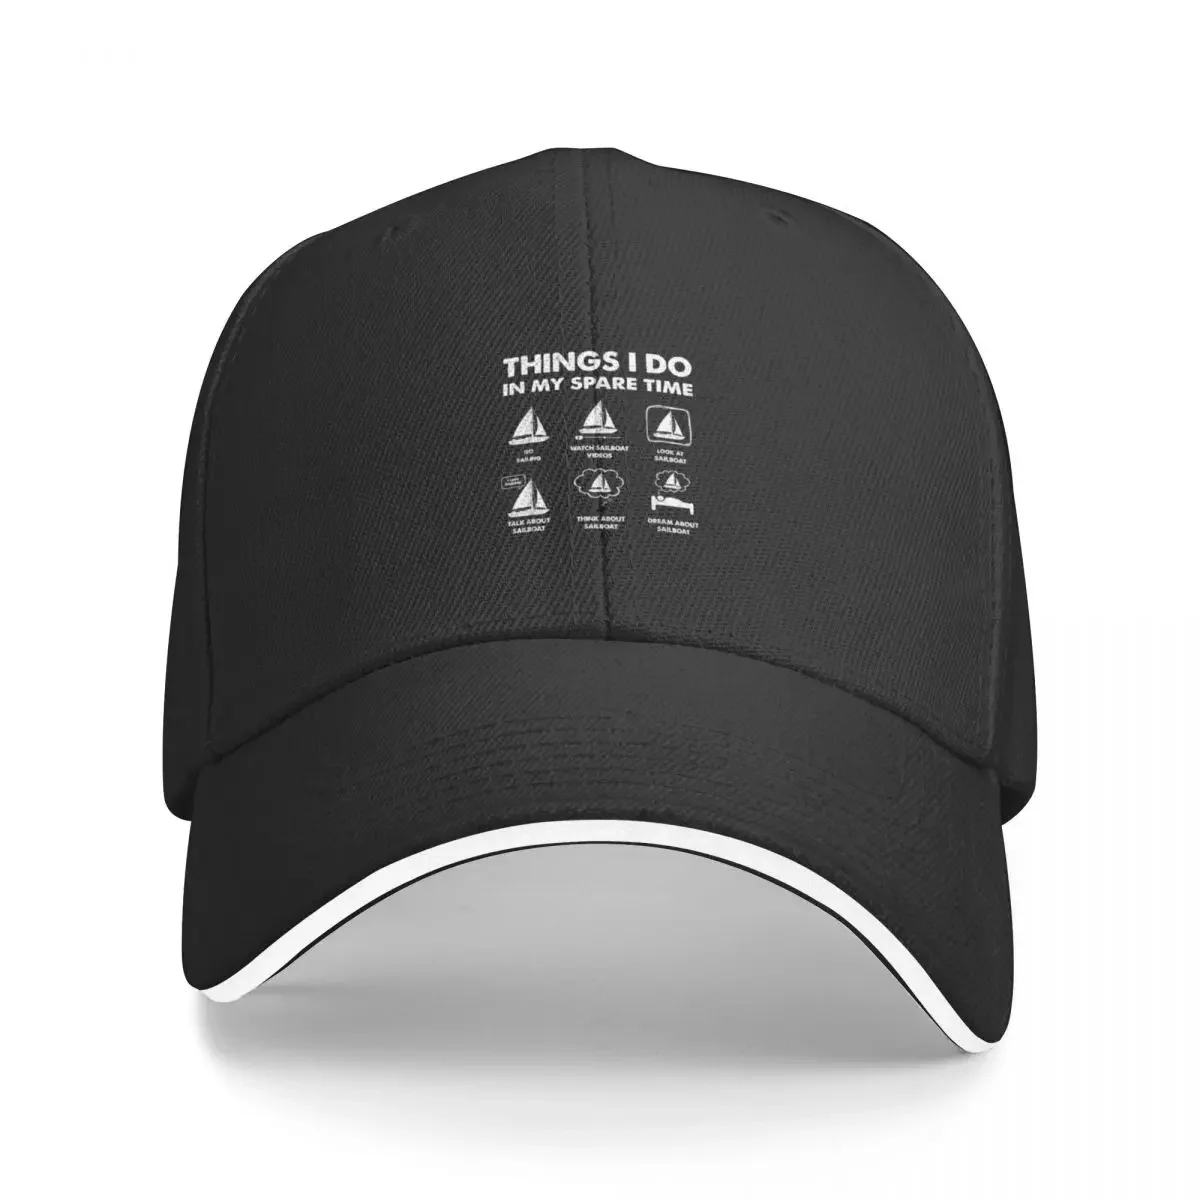 

Things I Do In My Spare Time Boating Sailing Sailboat Boat Baseball Cap Hip Hop Golf Cap Bobble Hat For Women Men's